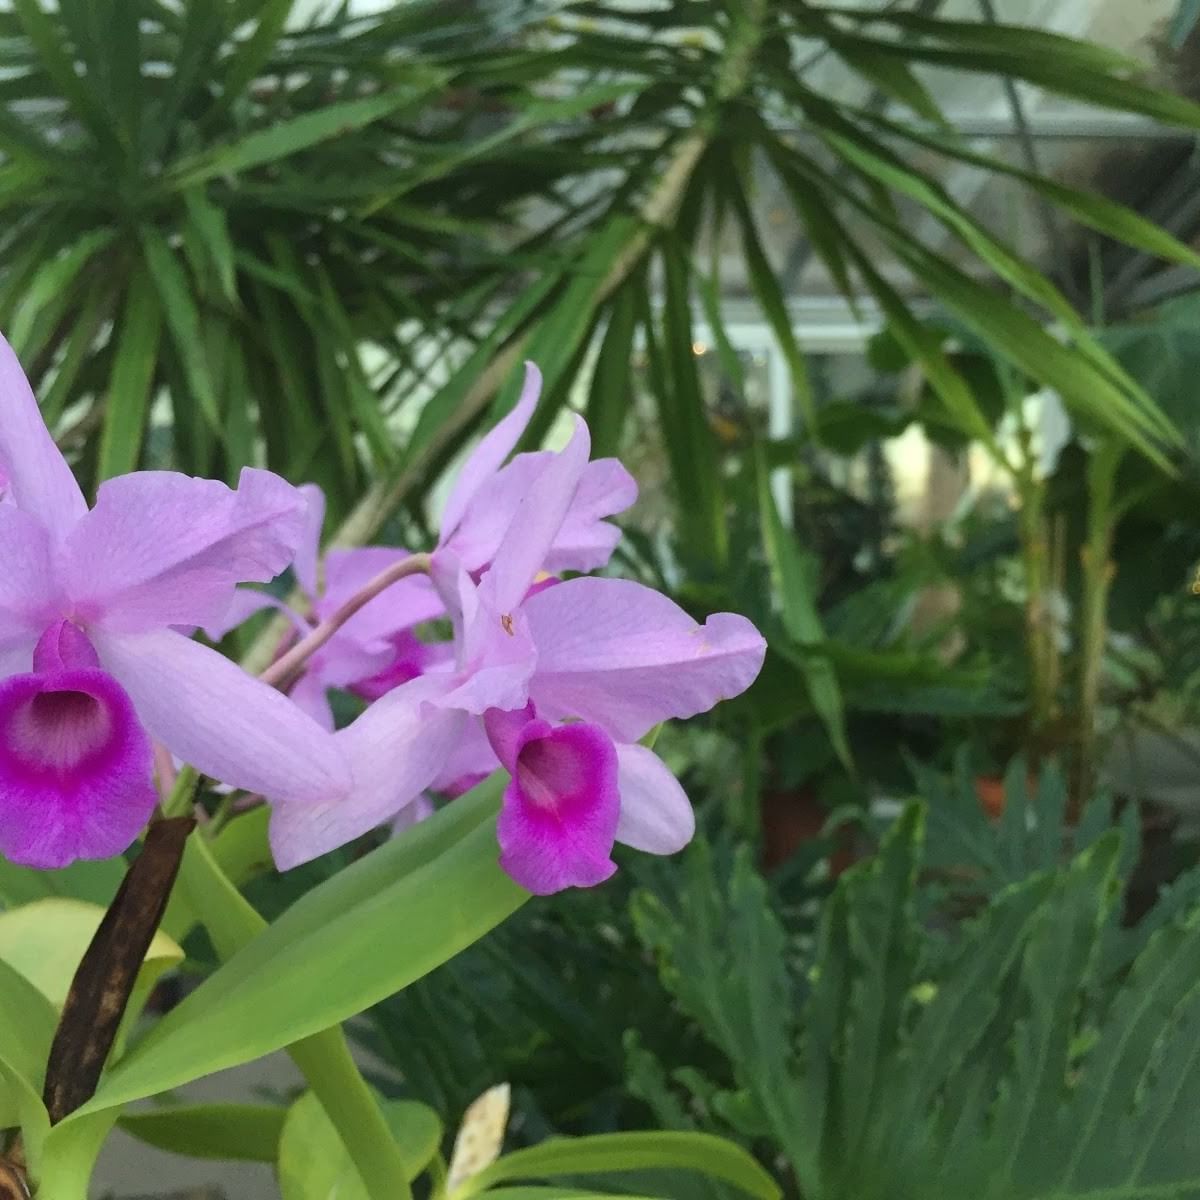 Cattleya Patinii orchid in the Greenhouse at Alderbrook Resort